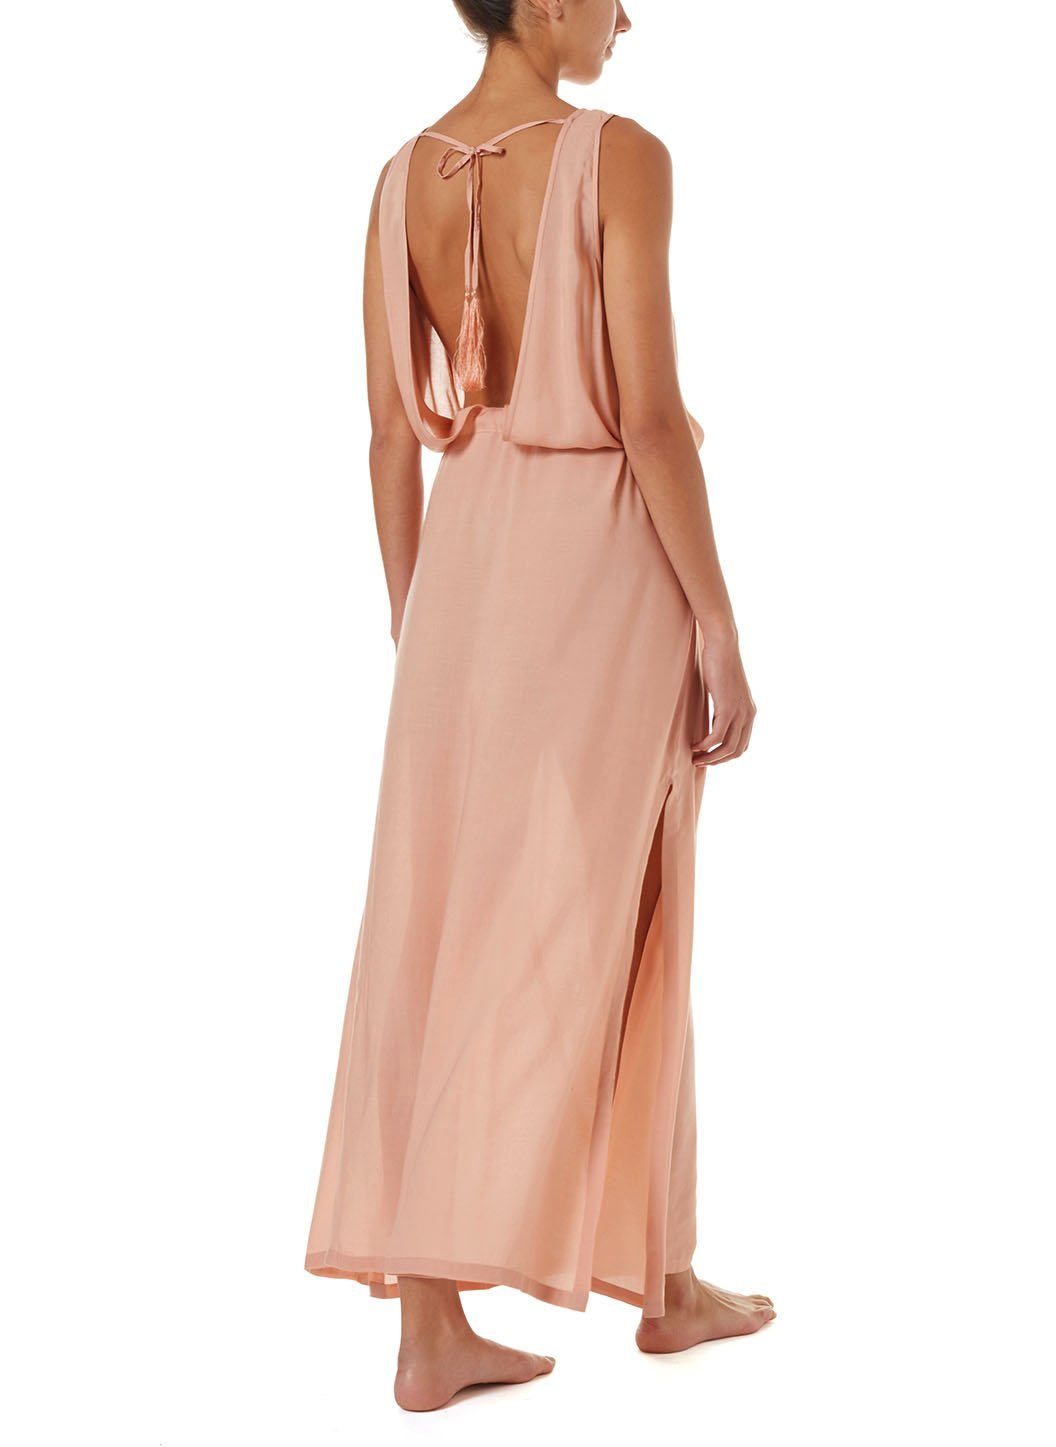 jacquie tan laceup belted maxi dress 2019 B